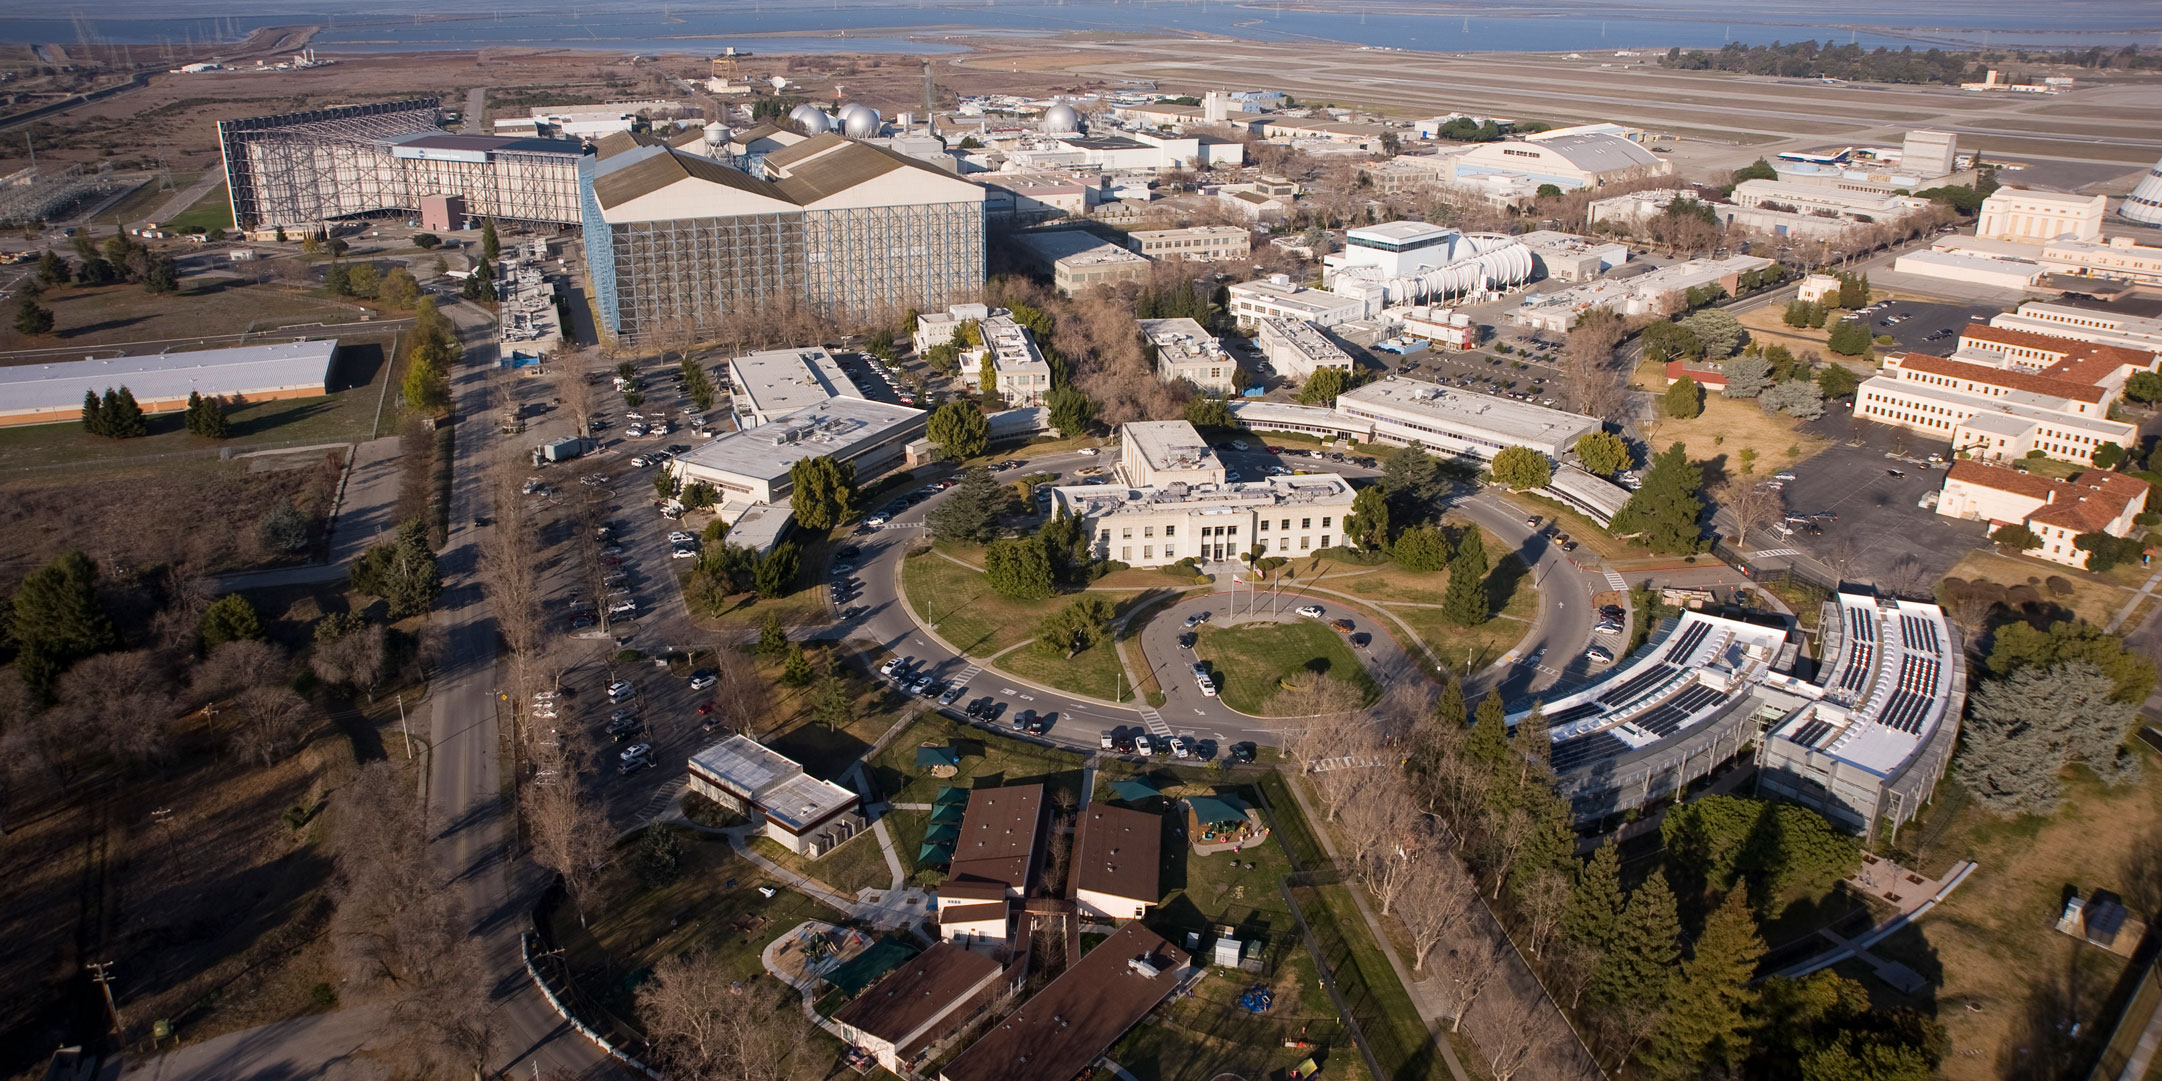 Aerial image of NASA Ames Research Center.